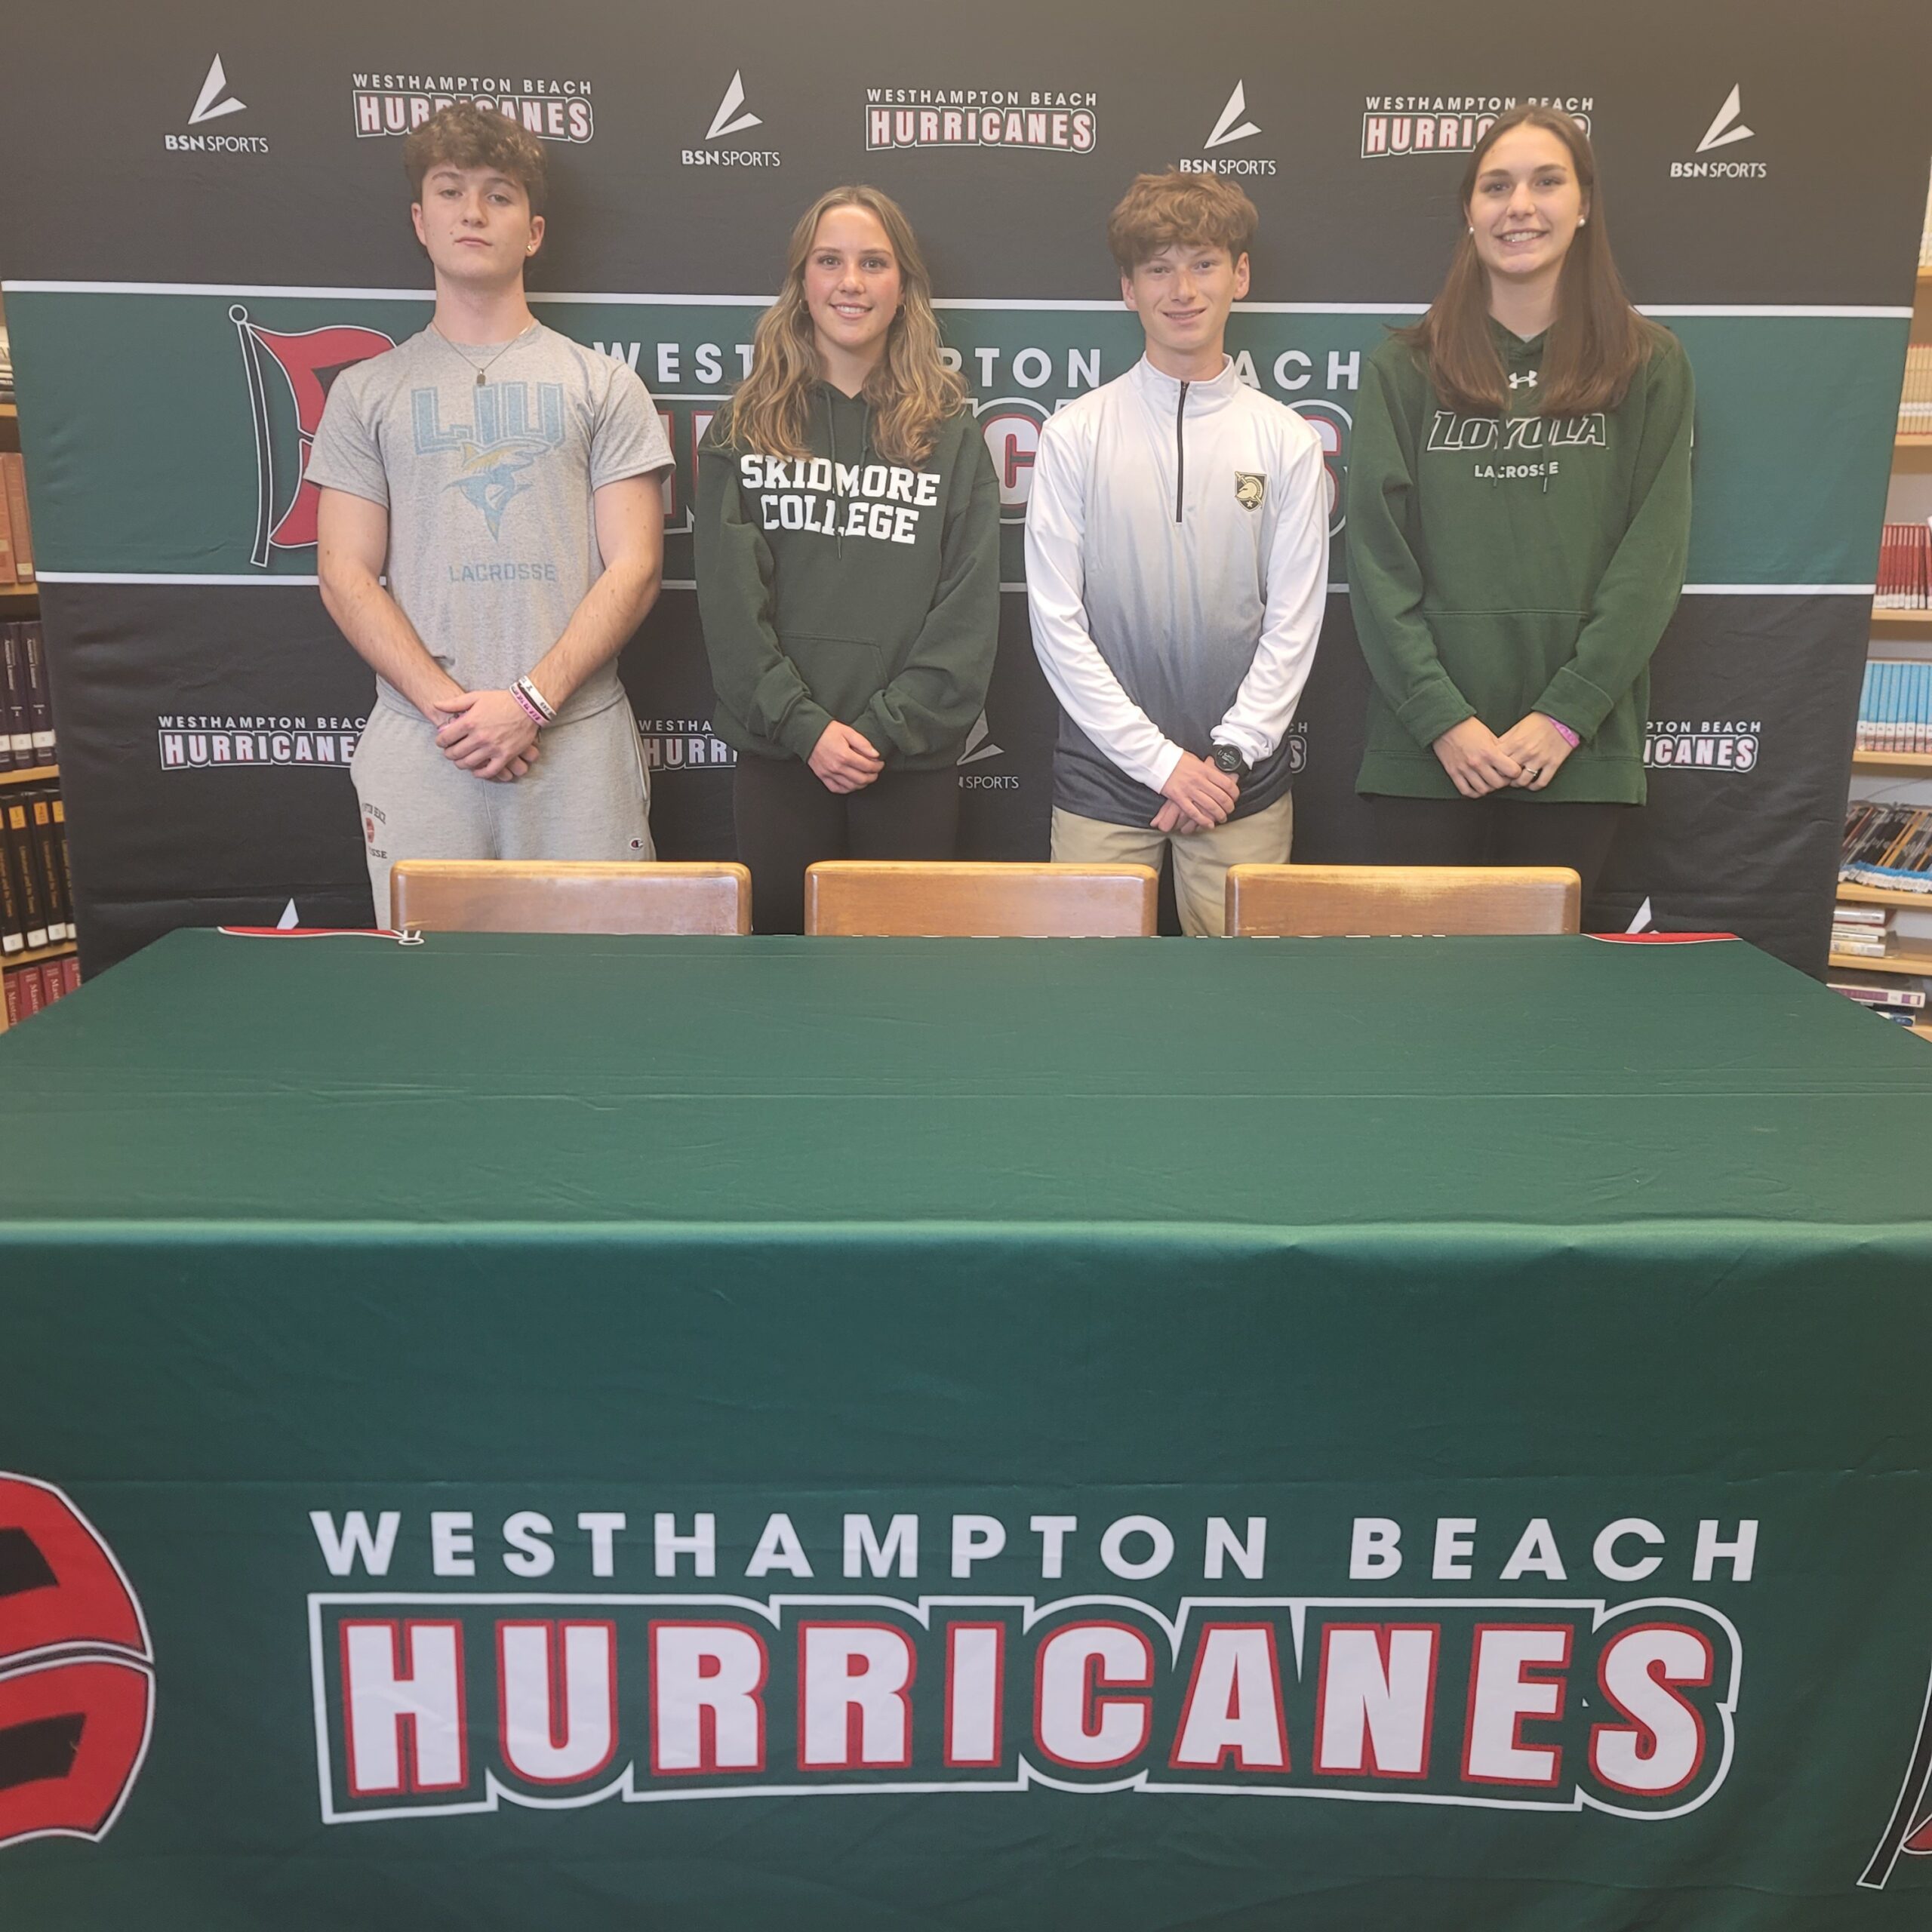 During a college signing ceremony on November 10, four Westhampton Beach High School senior athletes signed letters of intent.
From left, Maximus Haynia signed with West Point track, Reilly Mahon with Loyola University, lacrosse; Morgan McEntee, Long Island University, lacrosse, and Amanda Shannon, Skidmore College, soccer. COURTESY WESTHAMPTON BEACH SCHOOL DISTRICT